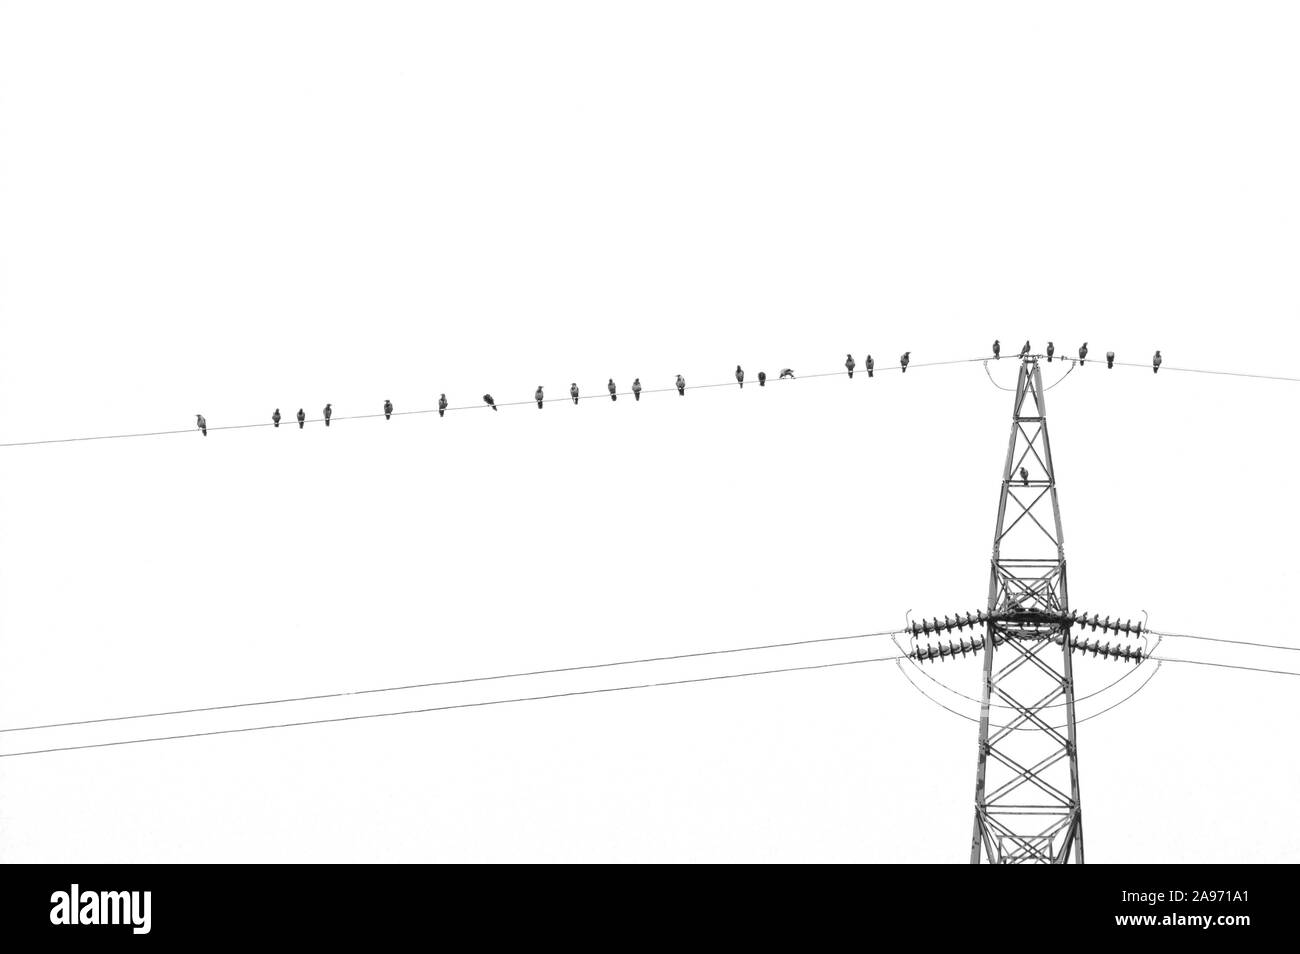 Crow birds on wire of high voltage electric tower isolated on white. Electricity, electric power, overhead power line and technology concepts. Stock Photo